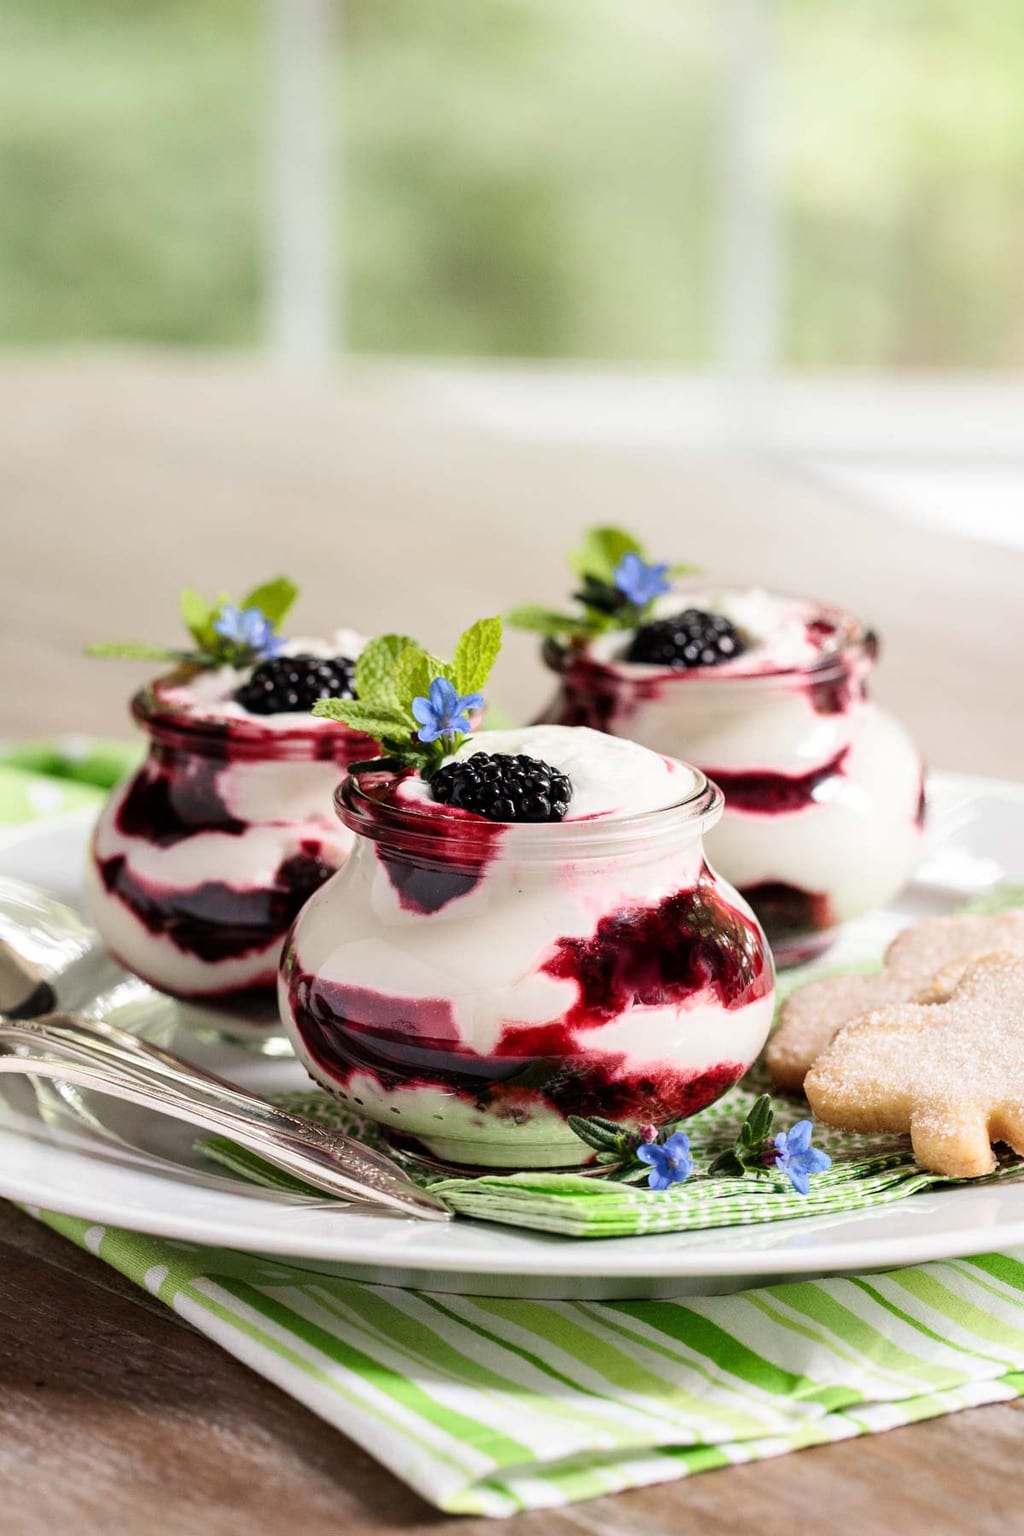 Vertical photo of a serving plate full of Irish Blackberry Fool desserts in individual glass Weck jars on a dining room table.